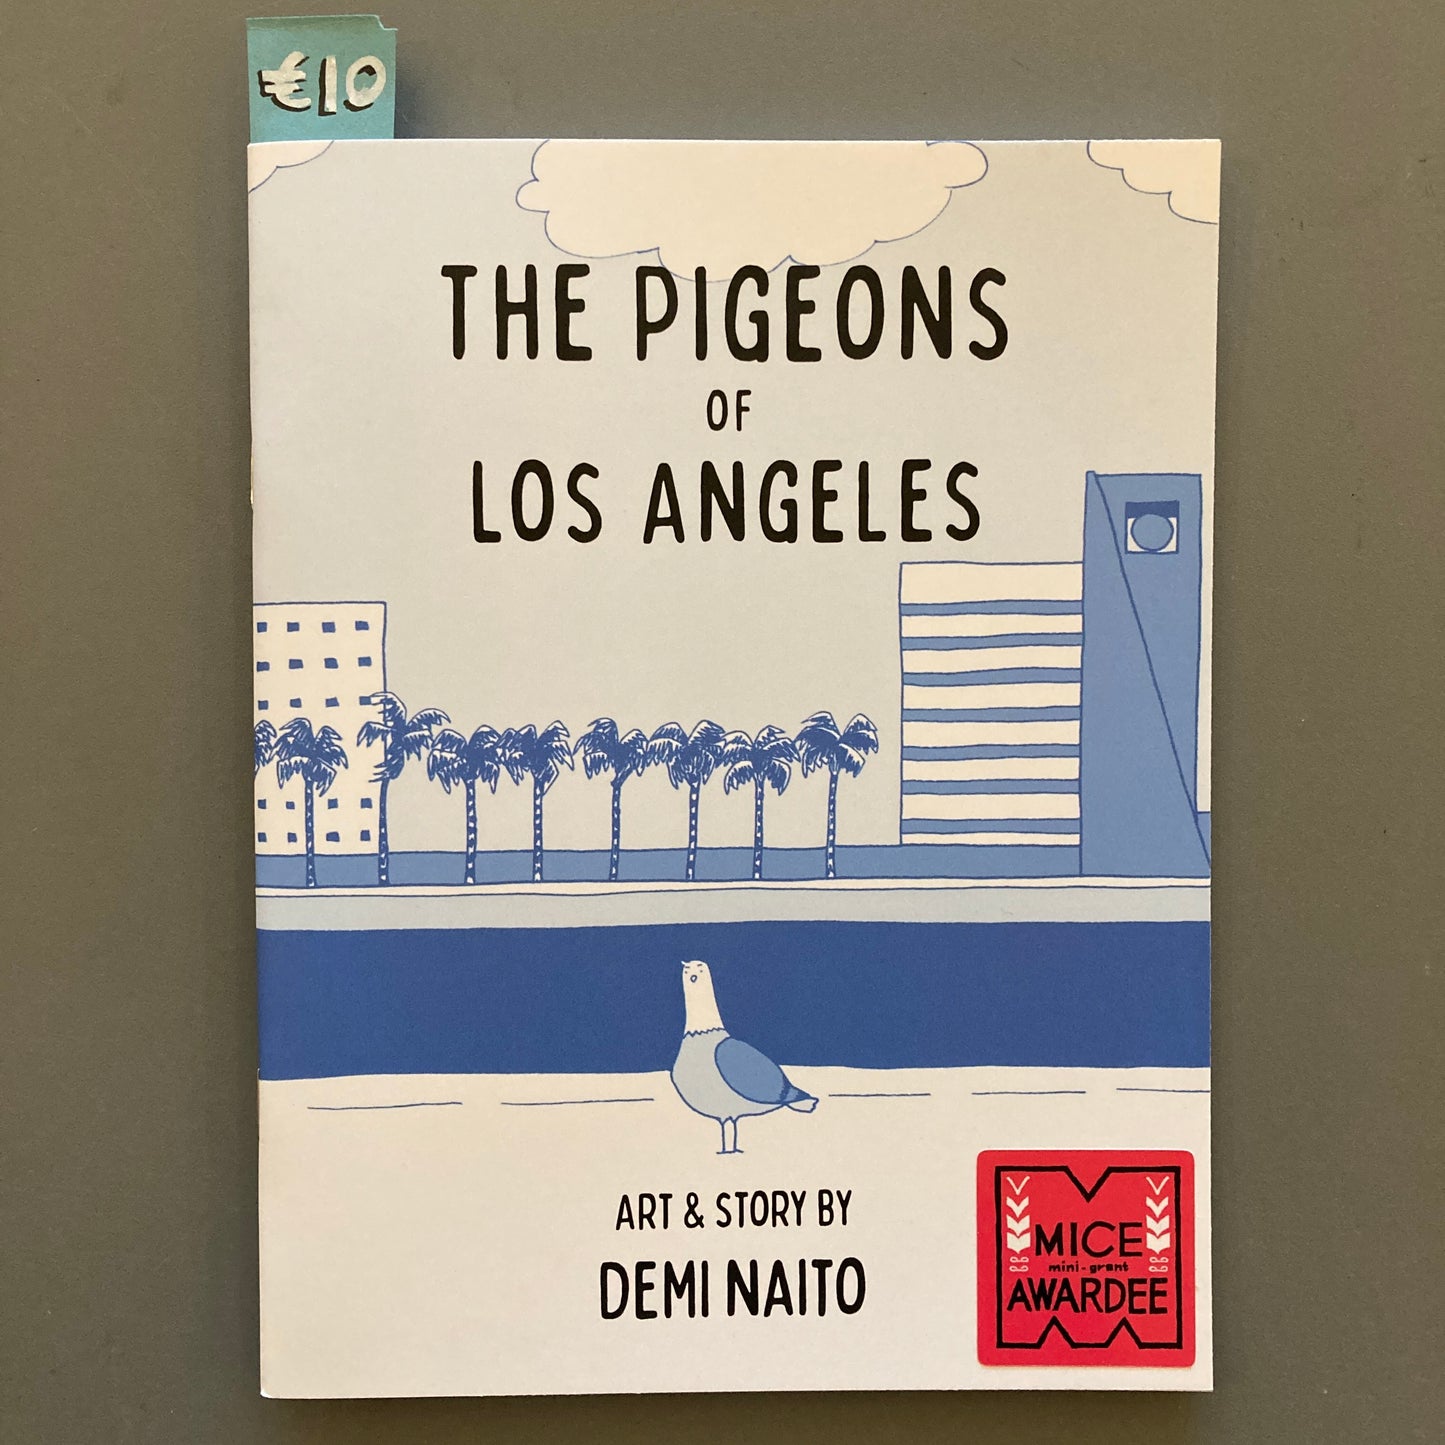 The Pigeons of Los Angeles